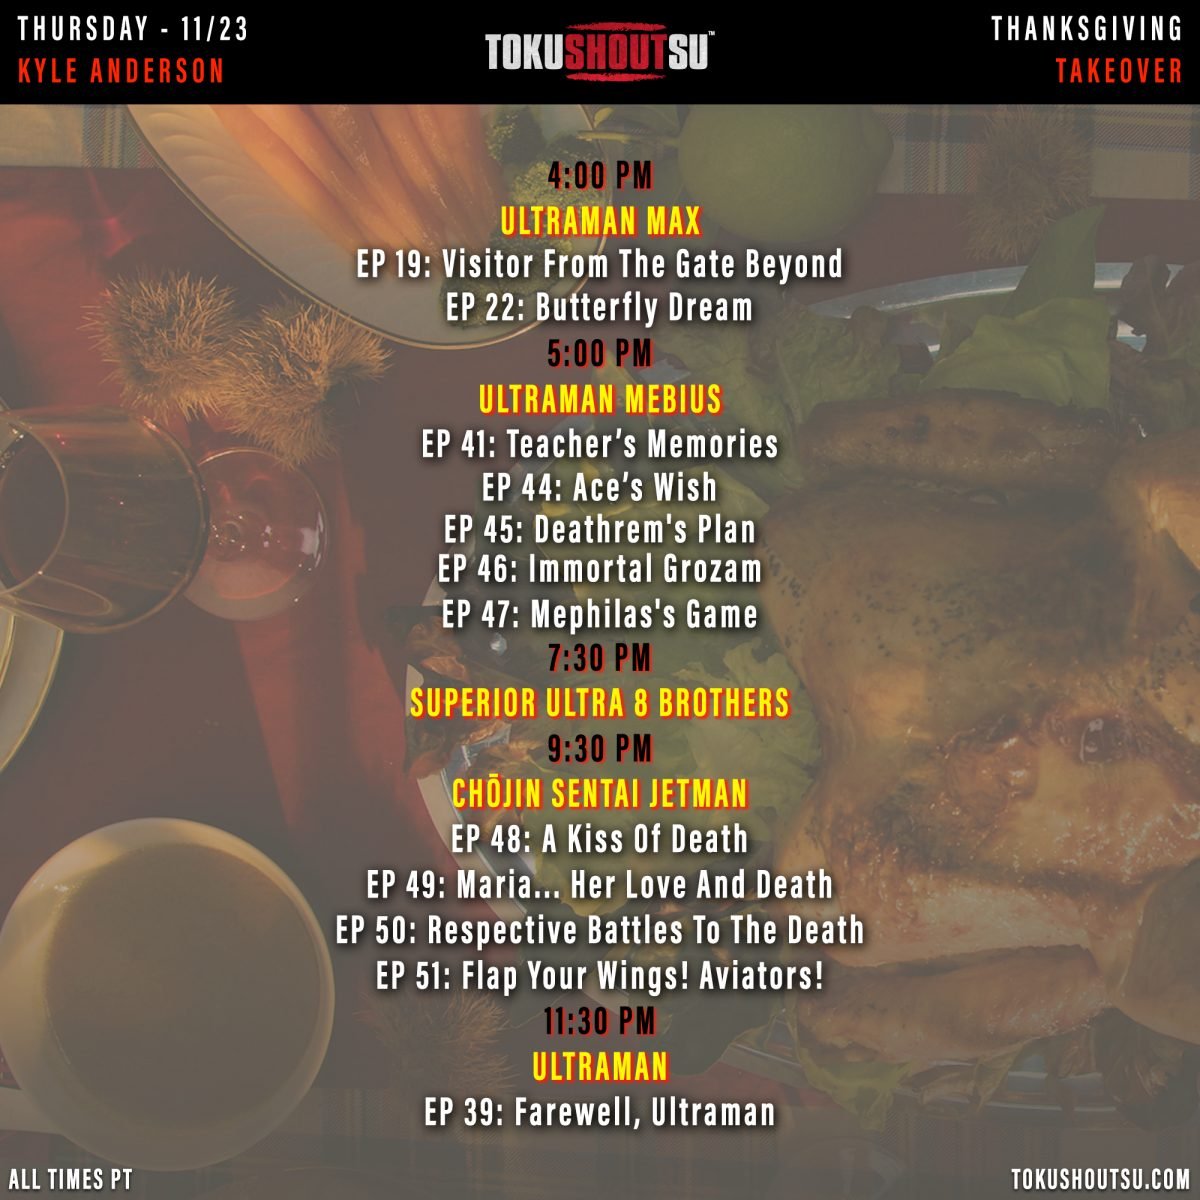 Schedule of Kyle Anderson's choices for TokuSHOUTsu's Thanksgiving week takeover.